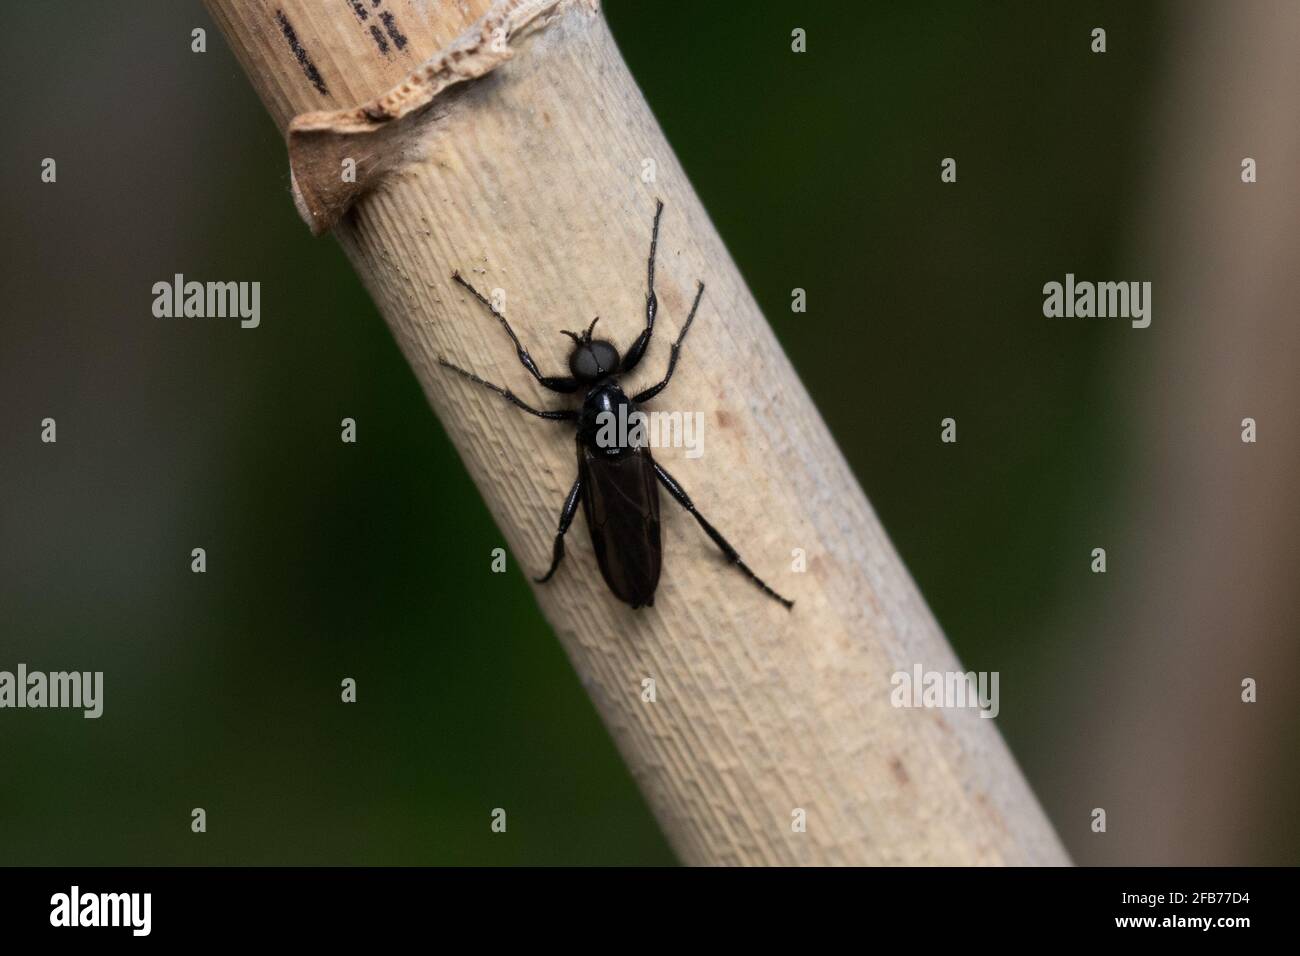 Closeup of a St. Mark's fly perched on the wood Stock Photo